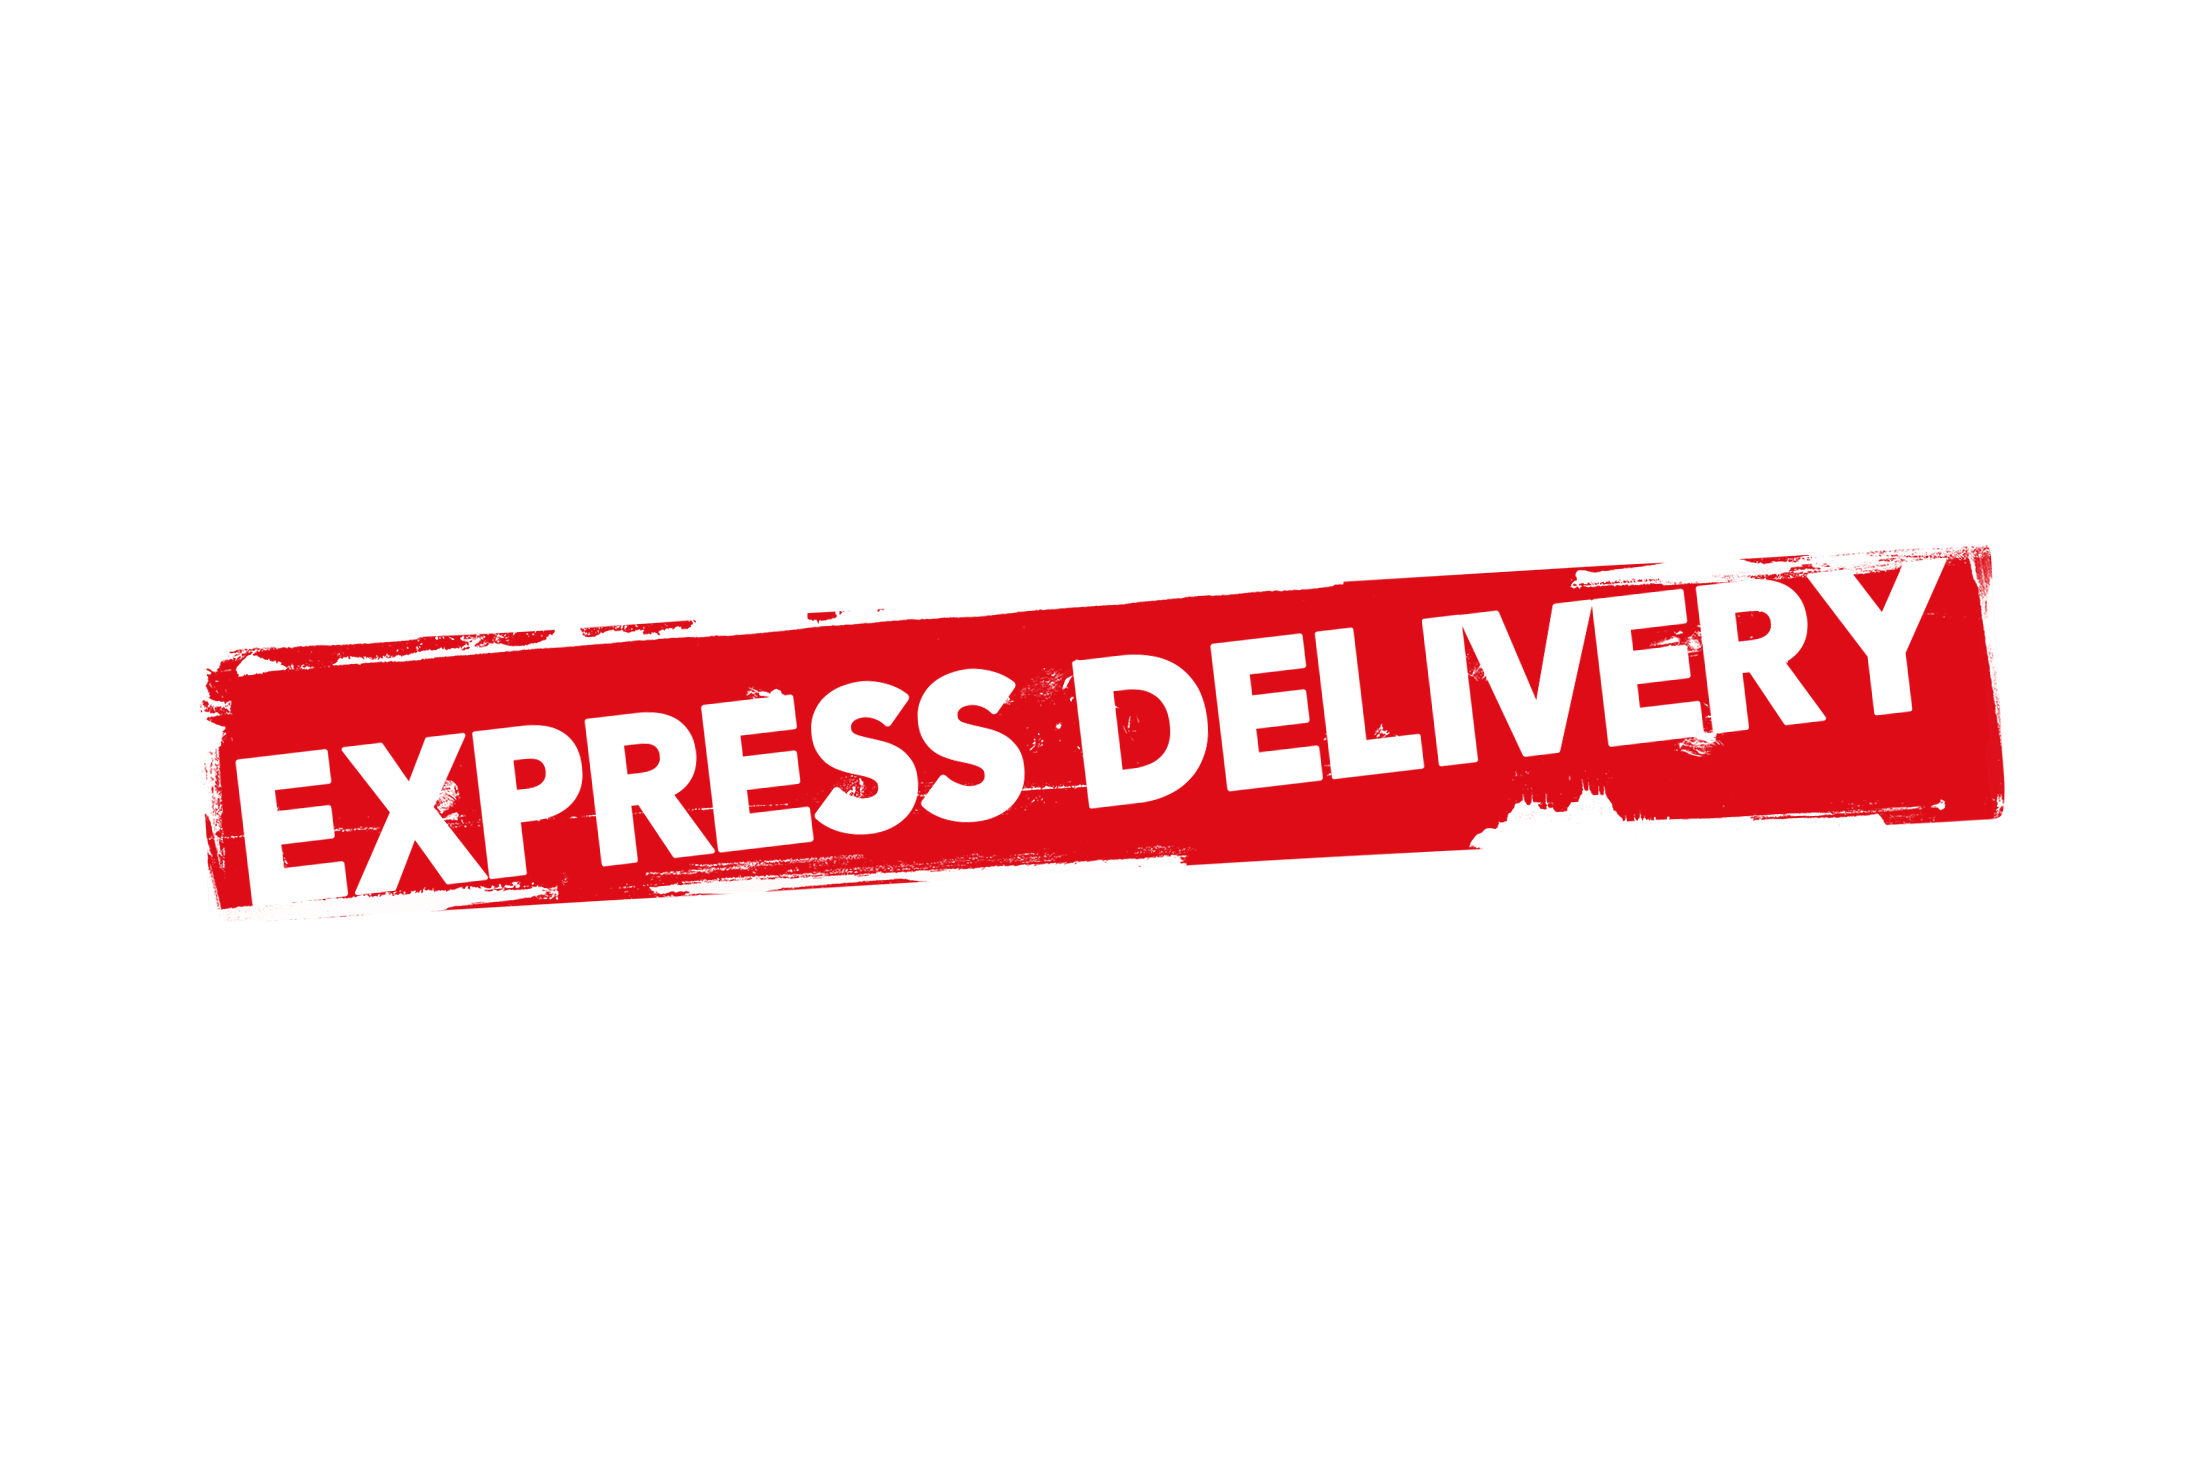 Grunge express delivery label PNG and PSD